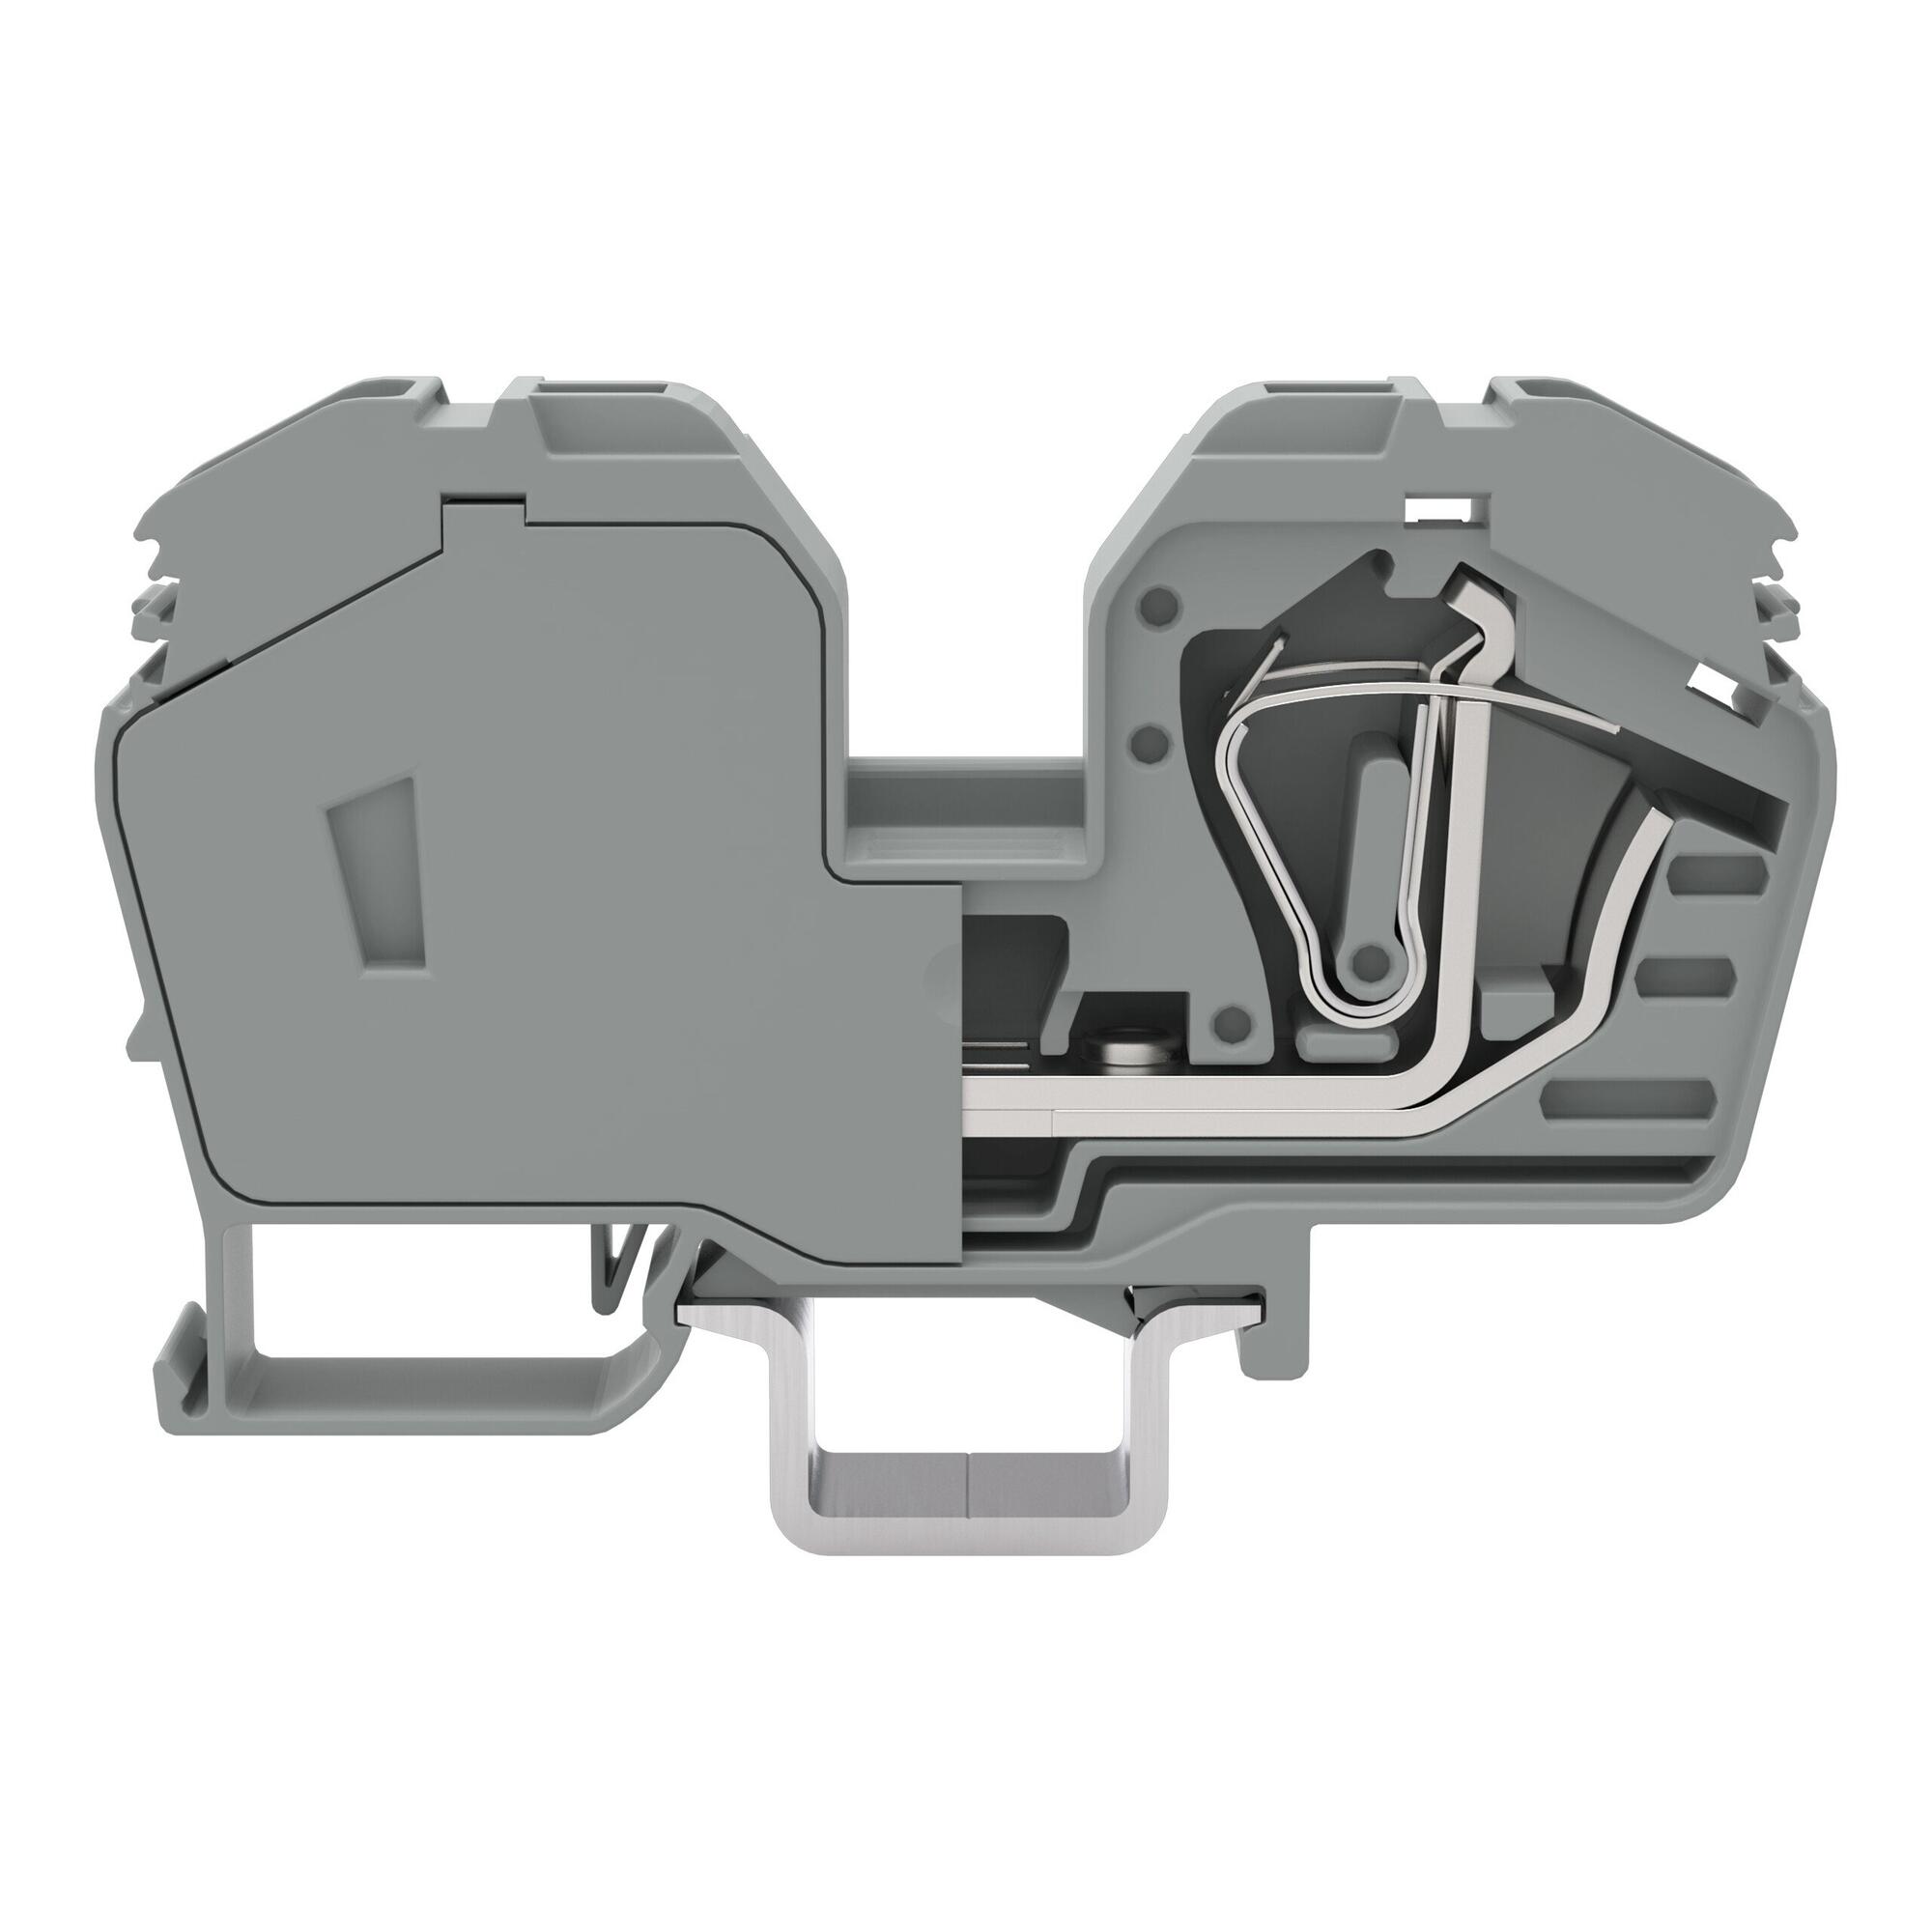 POWER CAGE CLAMP feedthrough terminal block; with integrated end plate; DIN 35 x 15 rail mount; 2-conductor; 2 AWG; 16 mm wide; gray